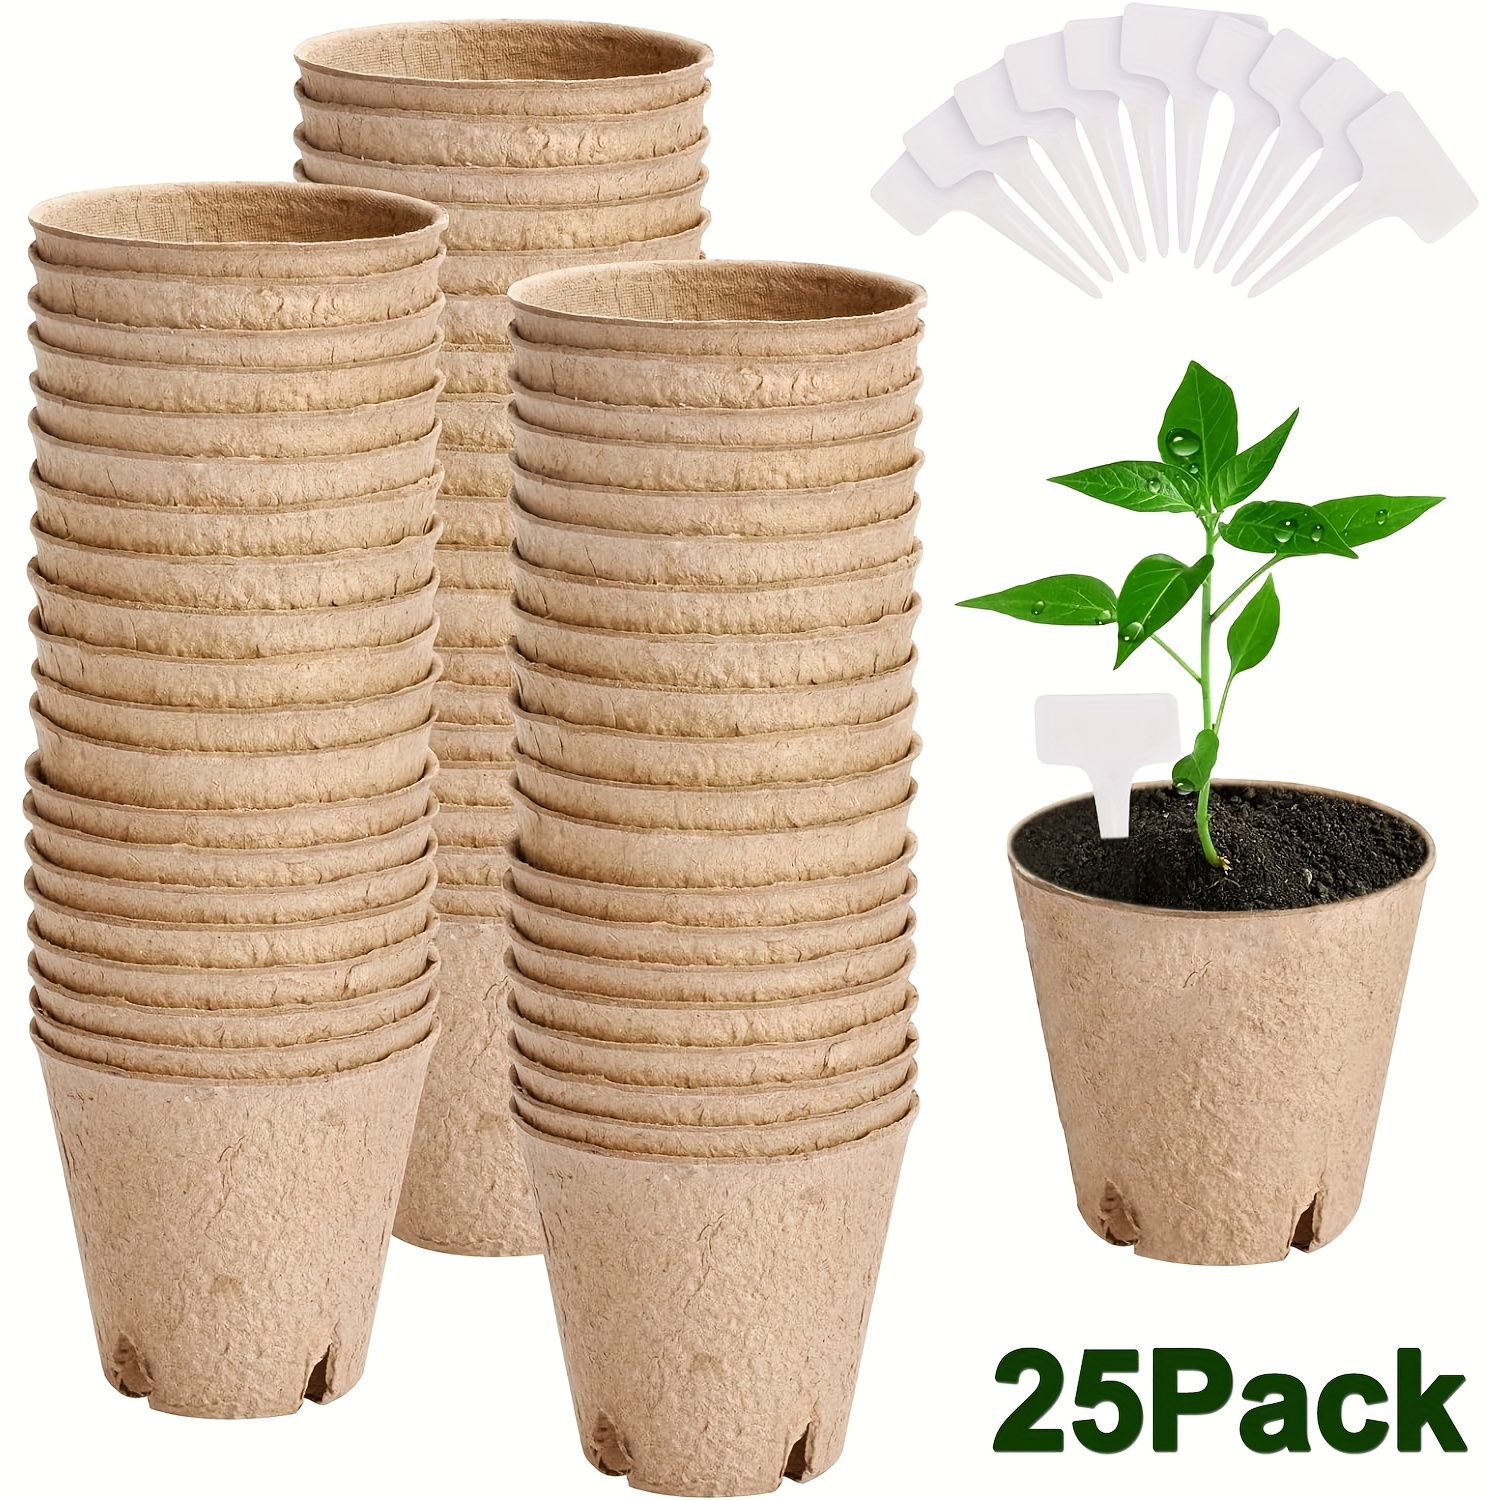 

25pcs, 3" Seed Pots For Planting, Seed Starter Peat Pots,heavy Duty Thickened Peat Pots For Seedlings,paper Pulp Peat Pot Germination Starter Pots For Planting,planting Cups For Seeds